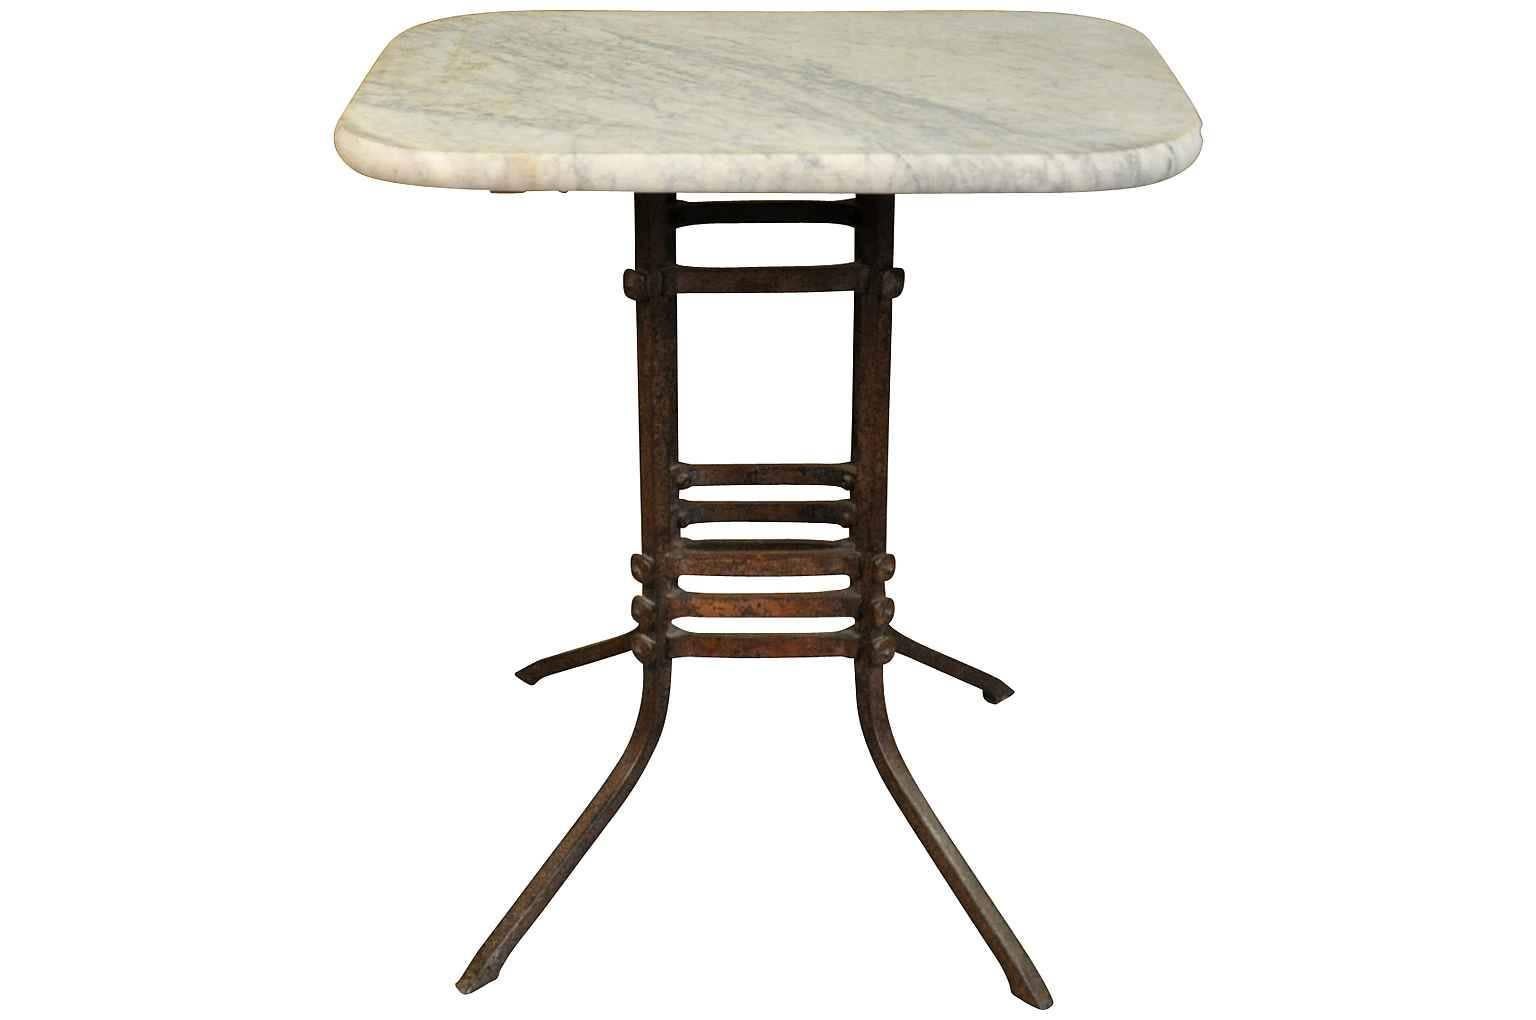 A wonderful 19th century French rectangular shaped gueridon in forged iron and marble top. The base is expertly crafted lending the table an Arts and Crafts feel. A perfect occasional table for any interior of garden.